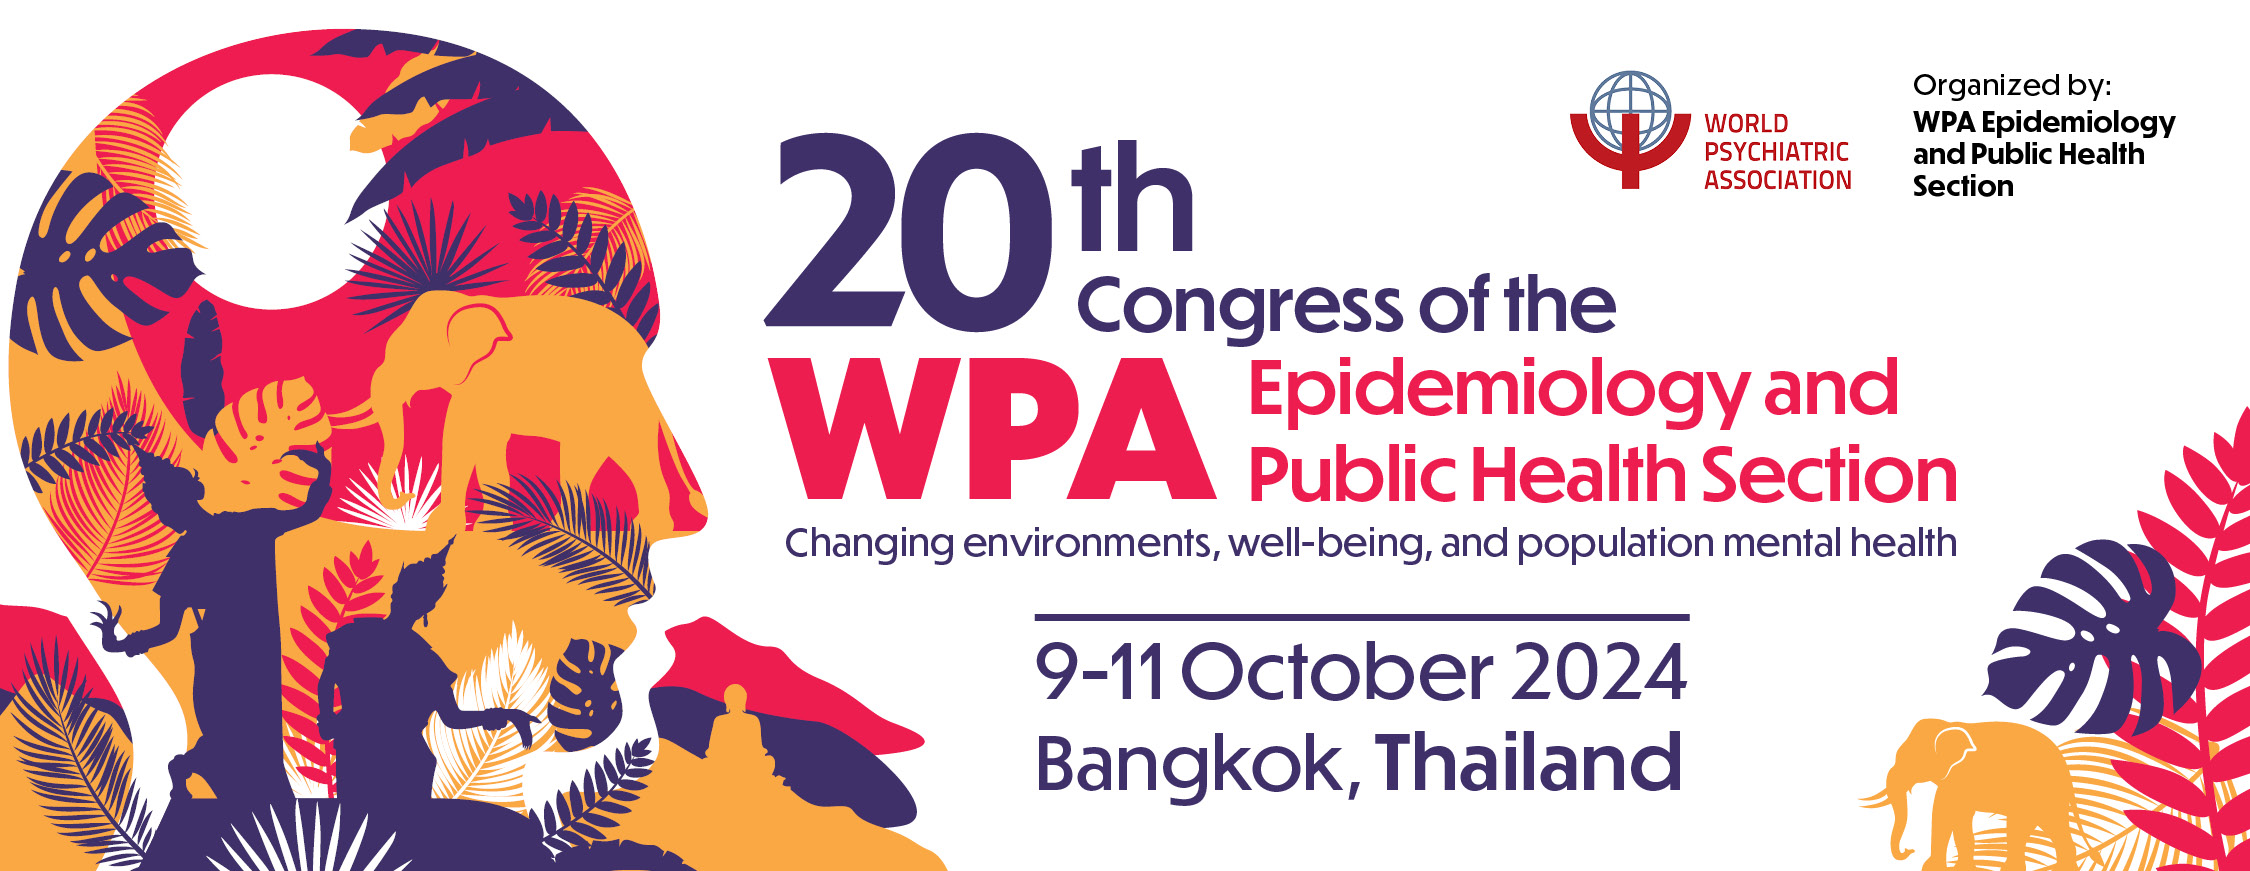 20th Congress of the WPA Epidemiology and Public Health Section, Bangkok, Thailand